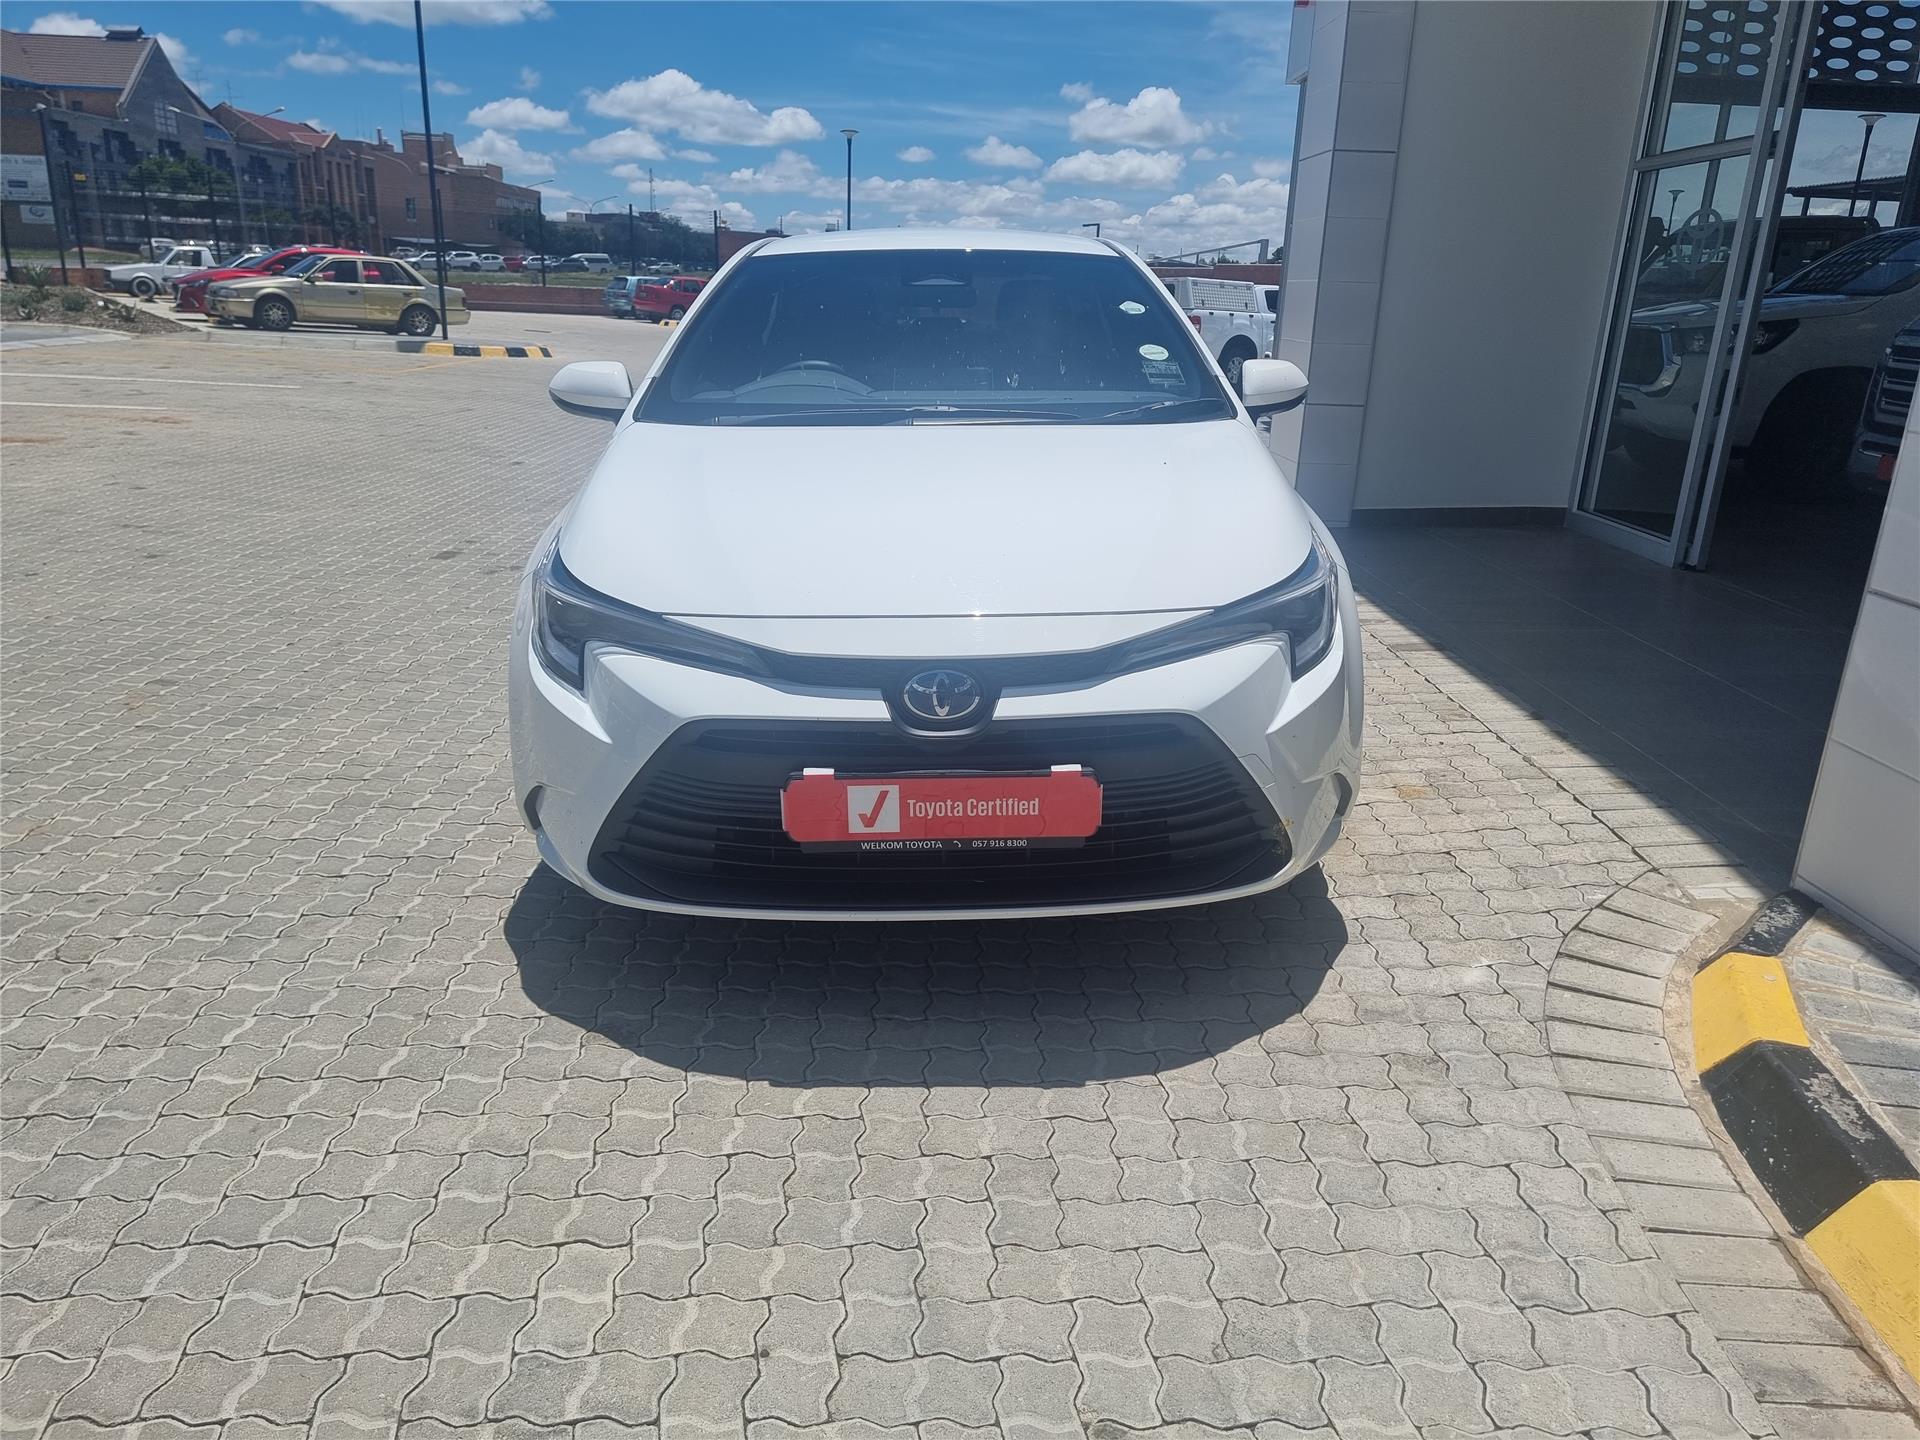 Demo 2024 Toyota Corolla for sale in Welkom Free State ID 1094681/1